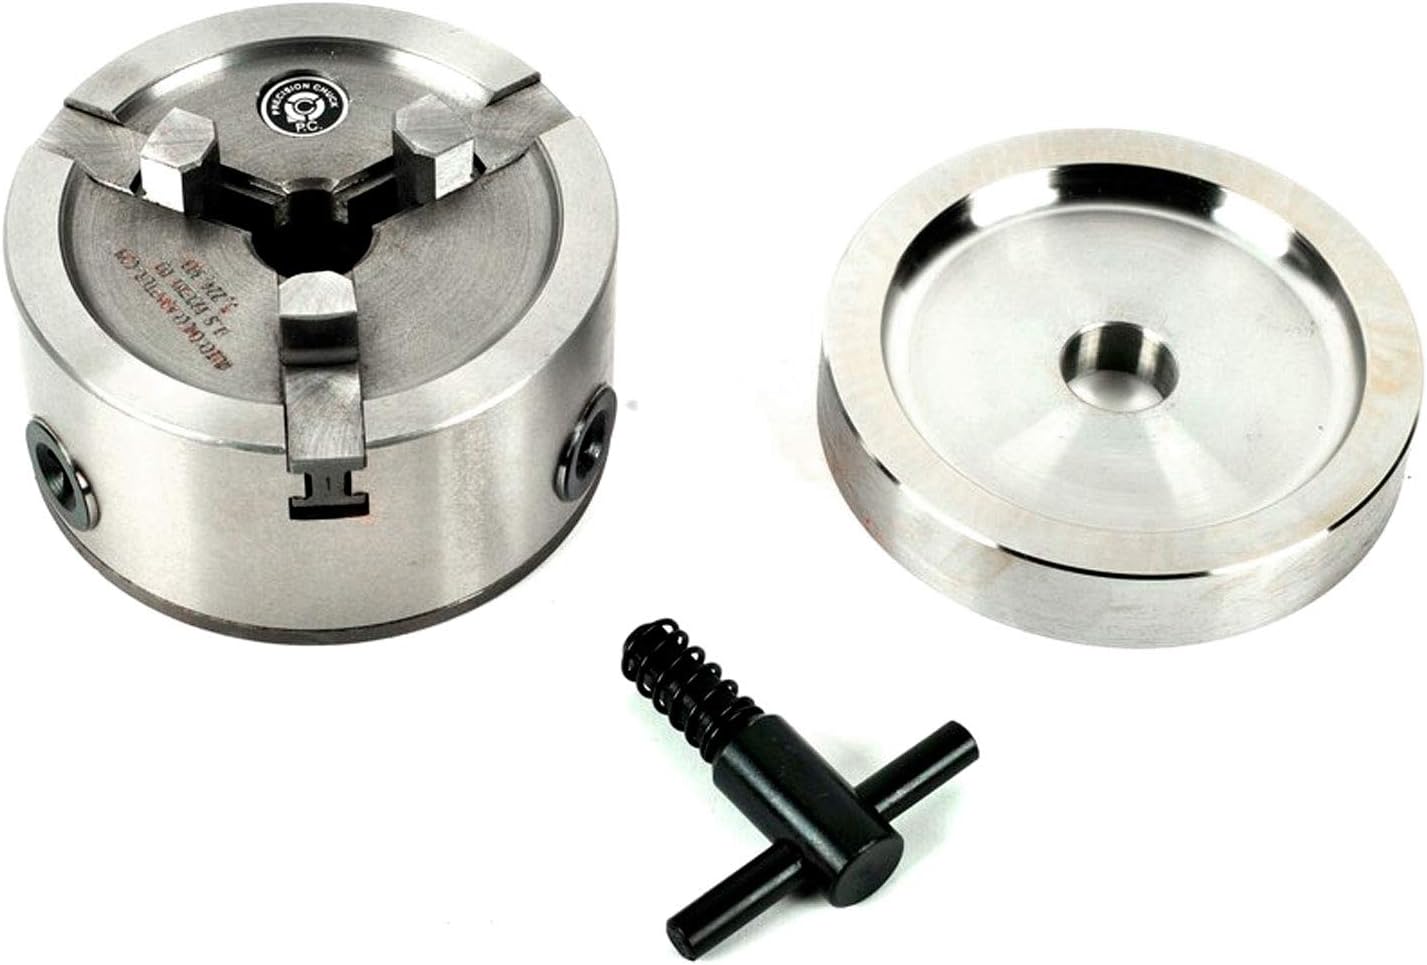 3 Piece Hubless Quick Chuck Adapter Set for 1" Arbor Brake Lathes